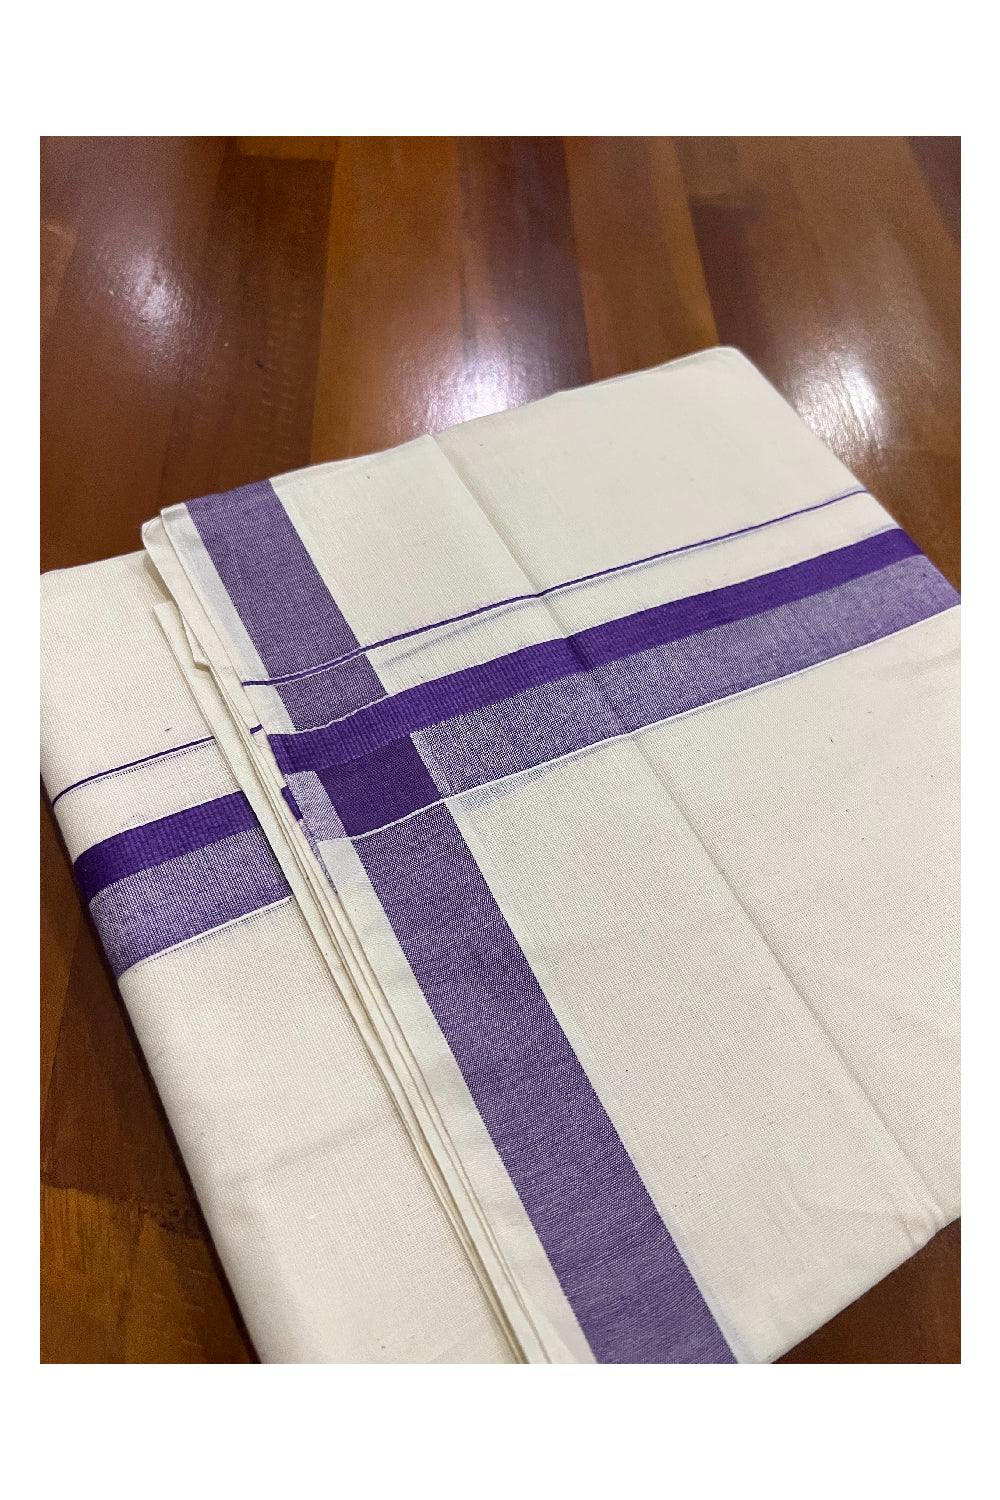 Off White Pure Cotton Double Mundu with Dark Violet Shaded Kara (South Indian Dhoti)